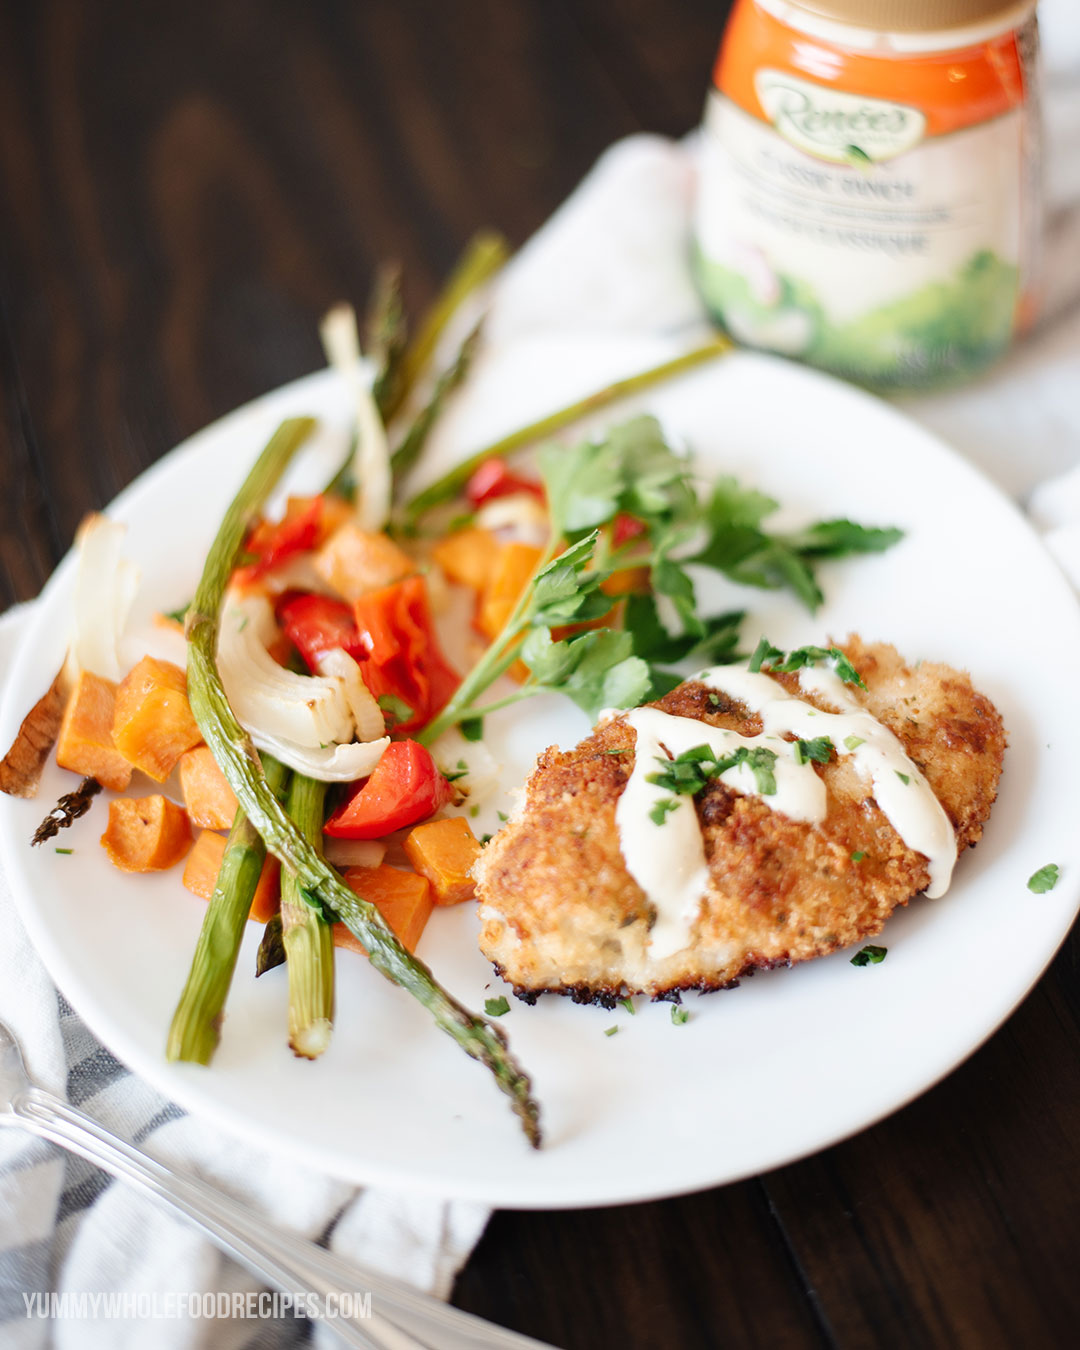 Parmesan & Panko Chicken and Roasted Vegetables Recipe